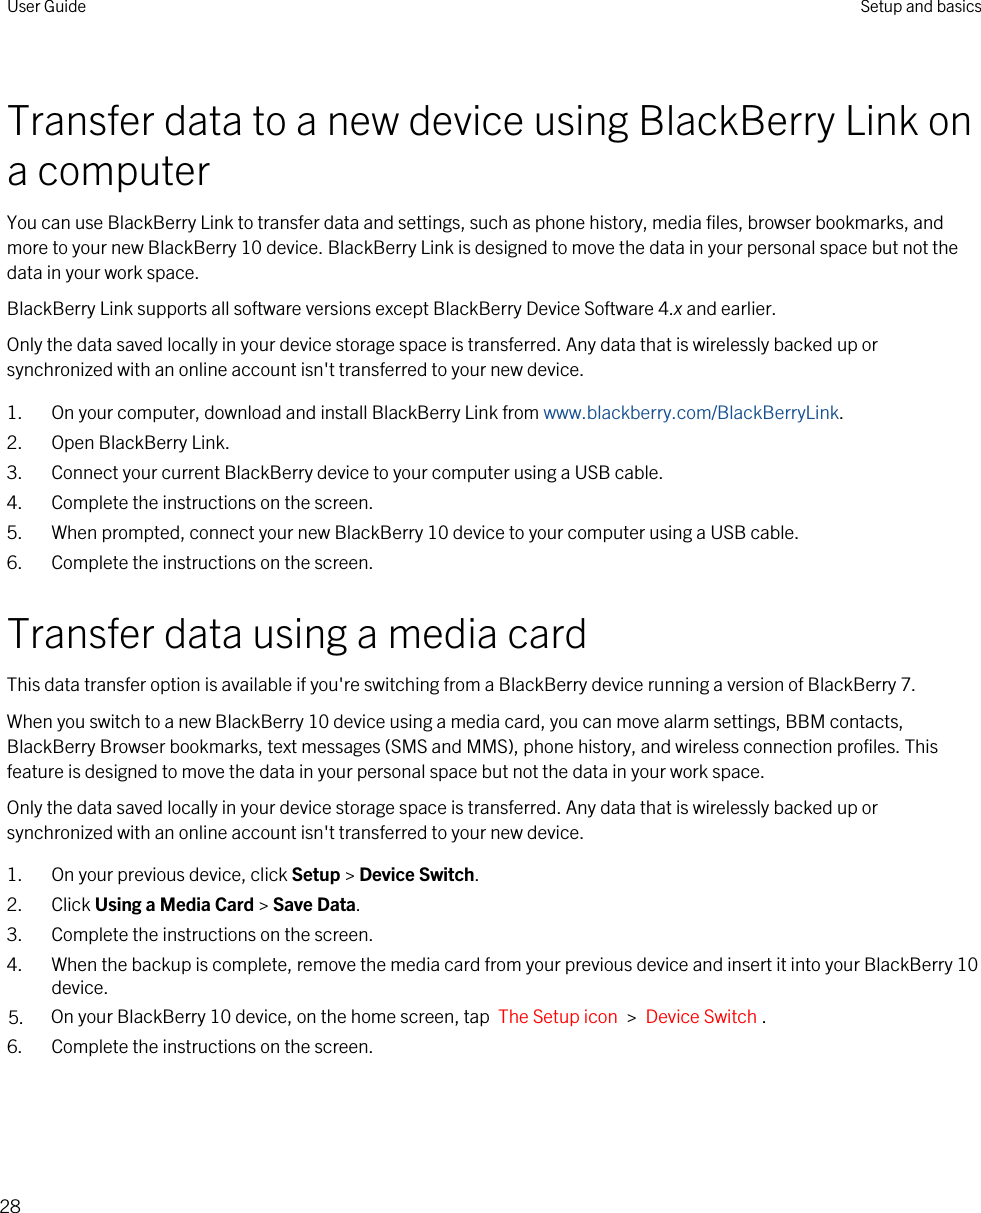 Transfer data to a new device using BlackBerry Link on a computerYou can use BlackBerry Link to transfer data and settings, such as phone history, media files, browser bookmarks, and more to your new BlackBerry 10 device. BlackBerry Link is designed to move the data in your personal space but not the data in your work space.BlackBerry Link supports all software versions except BlackBerry Device Software 4.x and earlier.Only the data saved locally in your device storage space is transferred. Any data that is wirelessly backed up or synchronized with an online account isn&apos;t transferred to your new device.1. On your computer, download and install BlackBerry Link from www.blackberry.com/BlackBerryLink.2. Open BlackBerry Link.3. Connect your current BlackBerry device to your computer using a USB cable.4. Complete the instructions on the screen.5. When prompted, connect your new BlackBerry 10 device to your computer using a USB cable.6. Complete the instructions on the screen.Transfer data using a media cardThis data transfer option is available if you&apos;re switching from a BlackBerry device running a version of BlackBerry 7.When you switch to a new BlackBerry 10 device using a media card, you can move alarm settings, BBM contacts, BlackBerry Browser bookmarks, text messages (SMS and MMS), phone history, and wireless connection profiles. This feature is designed to move the data in your personal space but not the data in your work space.Only the data saved locally in your device storage space is transferred. Any data that is wirelessly backed up or synchronized with an online account isn&apos;t transferred to your new device.1. On your previous device, click Setup &gt; Device Switch.2. Click Using a Media Card &gt; Save Data.3. Complete the instructions on the screen.4. When the backup is complete, remove the media card from your previous device and insert it into your BlackBerry 10 device.5. On your BlackBerry 10 device, on the home screen, tap  The Setup icon  &gt;  Device Switch .6. Complete the instructions on the screen.User Guide Setup and basics28